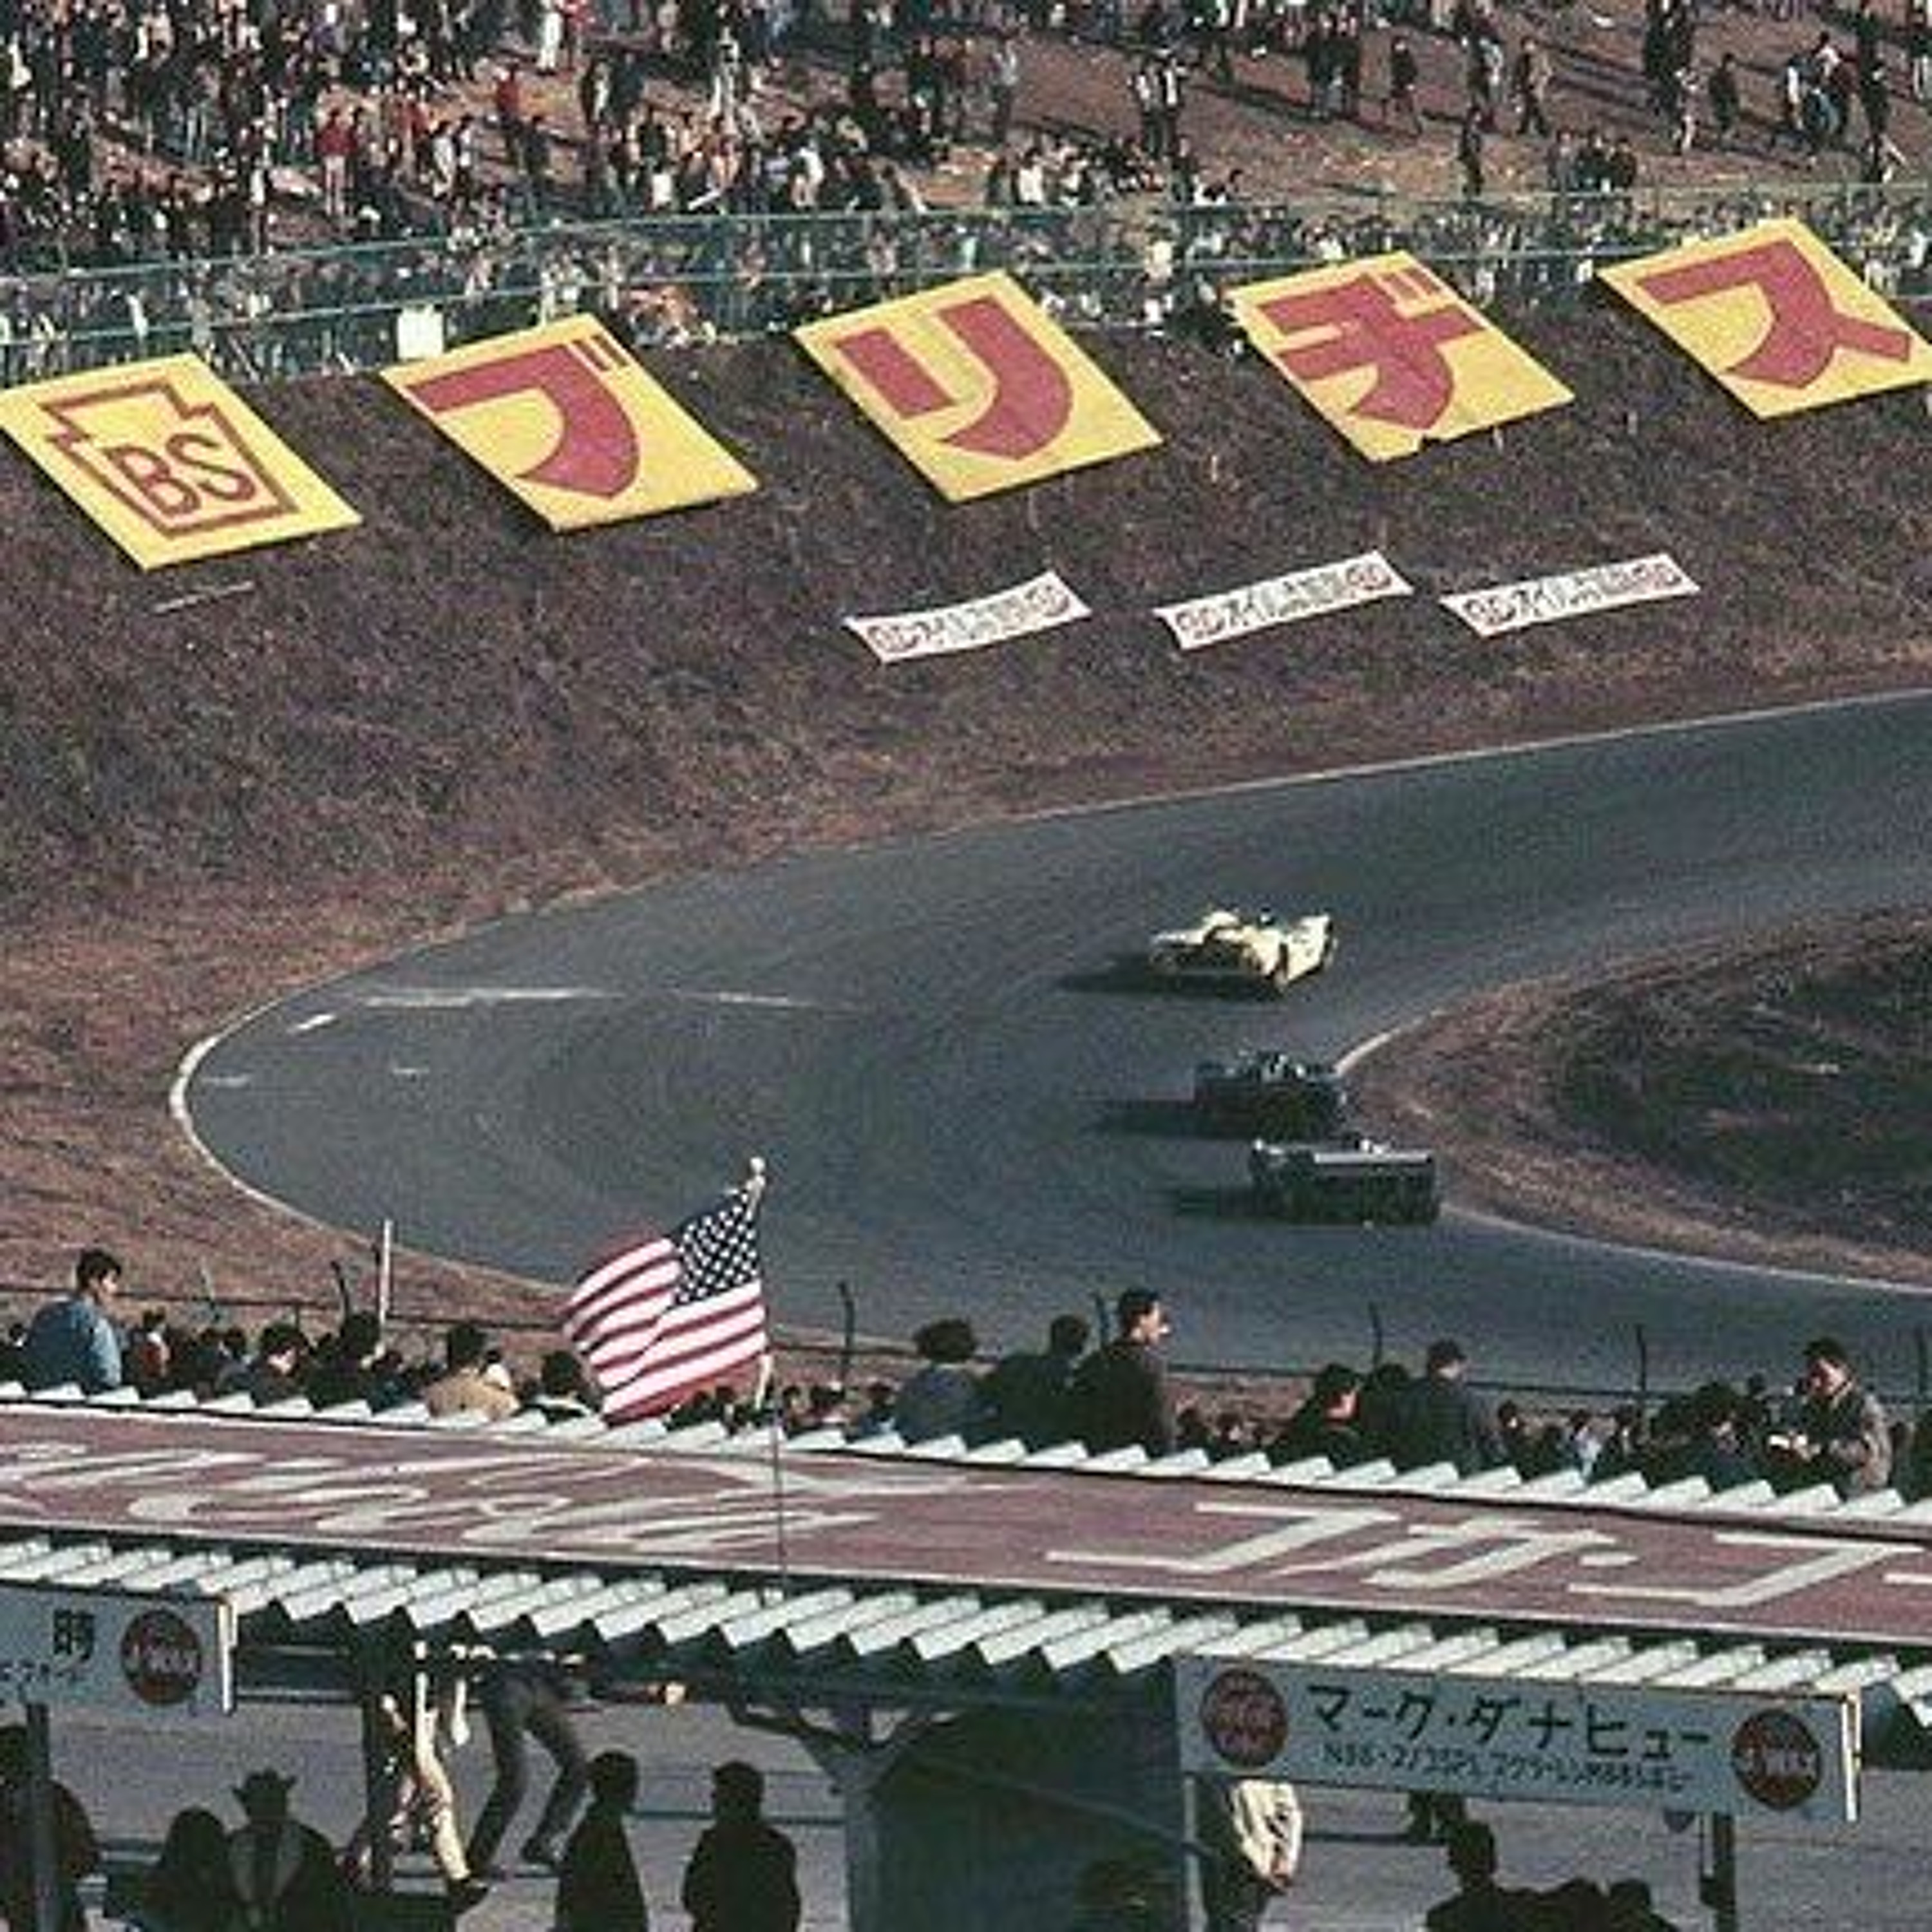 Episode #511: Well There’s Your Caution - Fuji Speedway (WTYP Tribute)